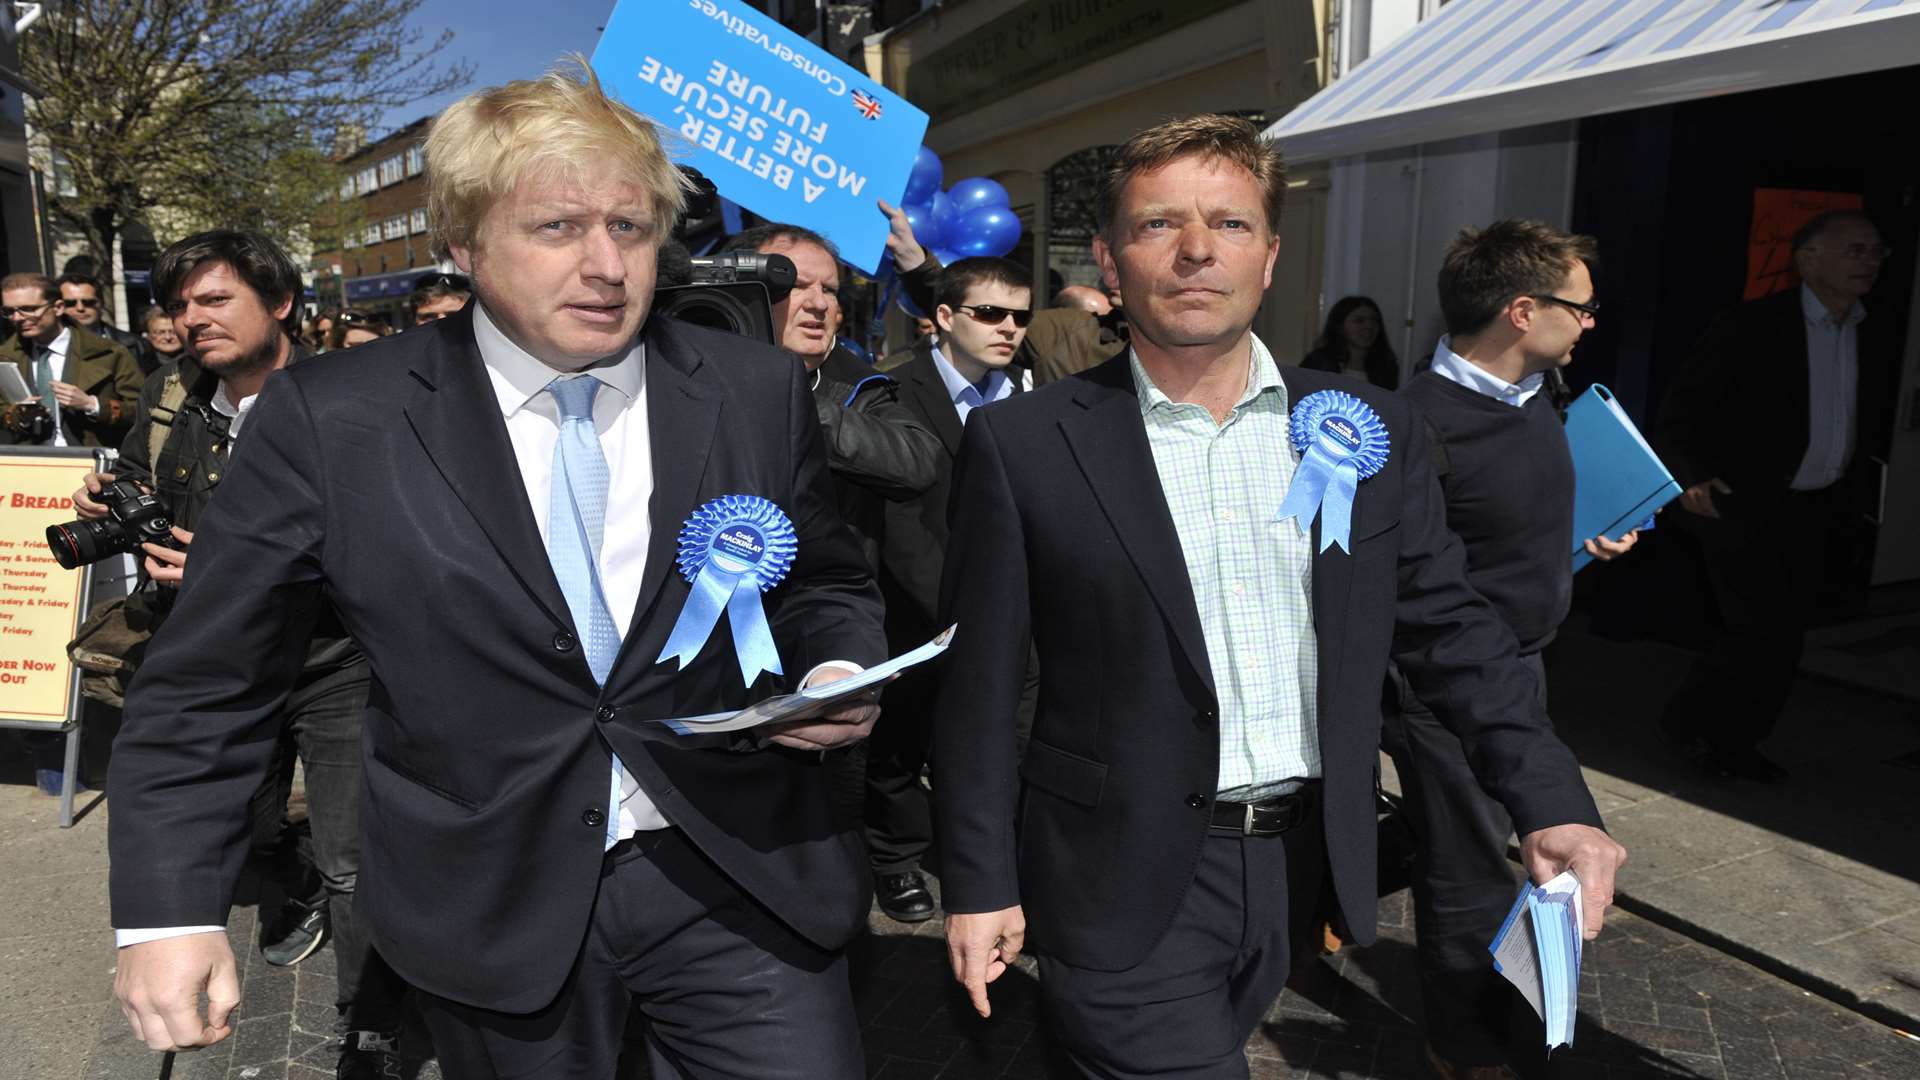 Mr Mackinlay on the campaign trail with Boris Johnson last week